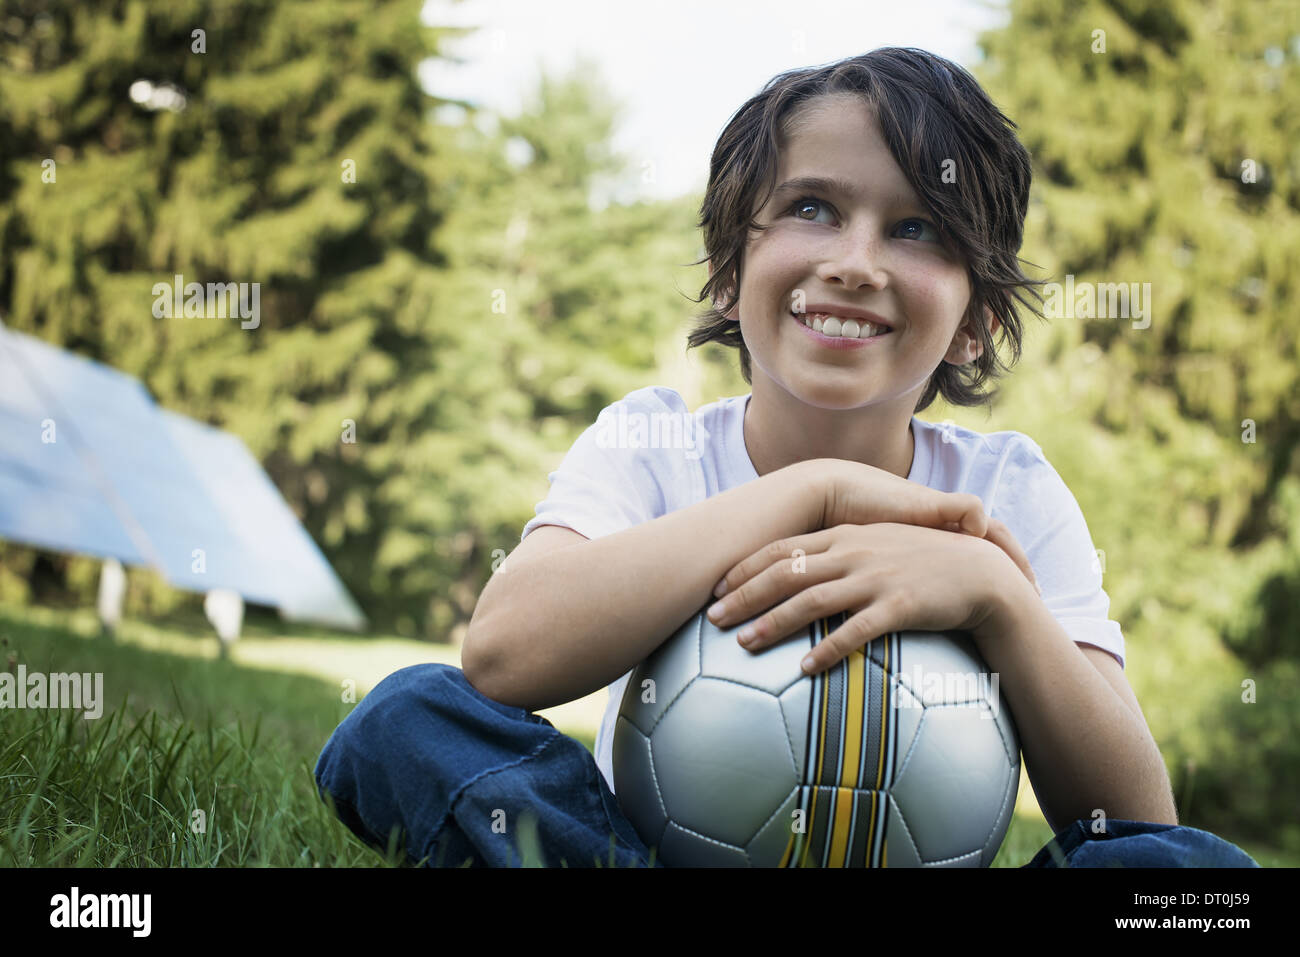 Woodstock, New York USA boy holding football sitting on grass panneau solaire Banque D'Images